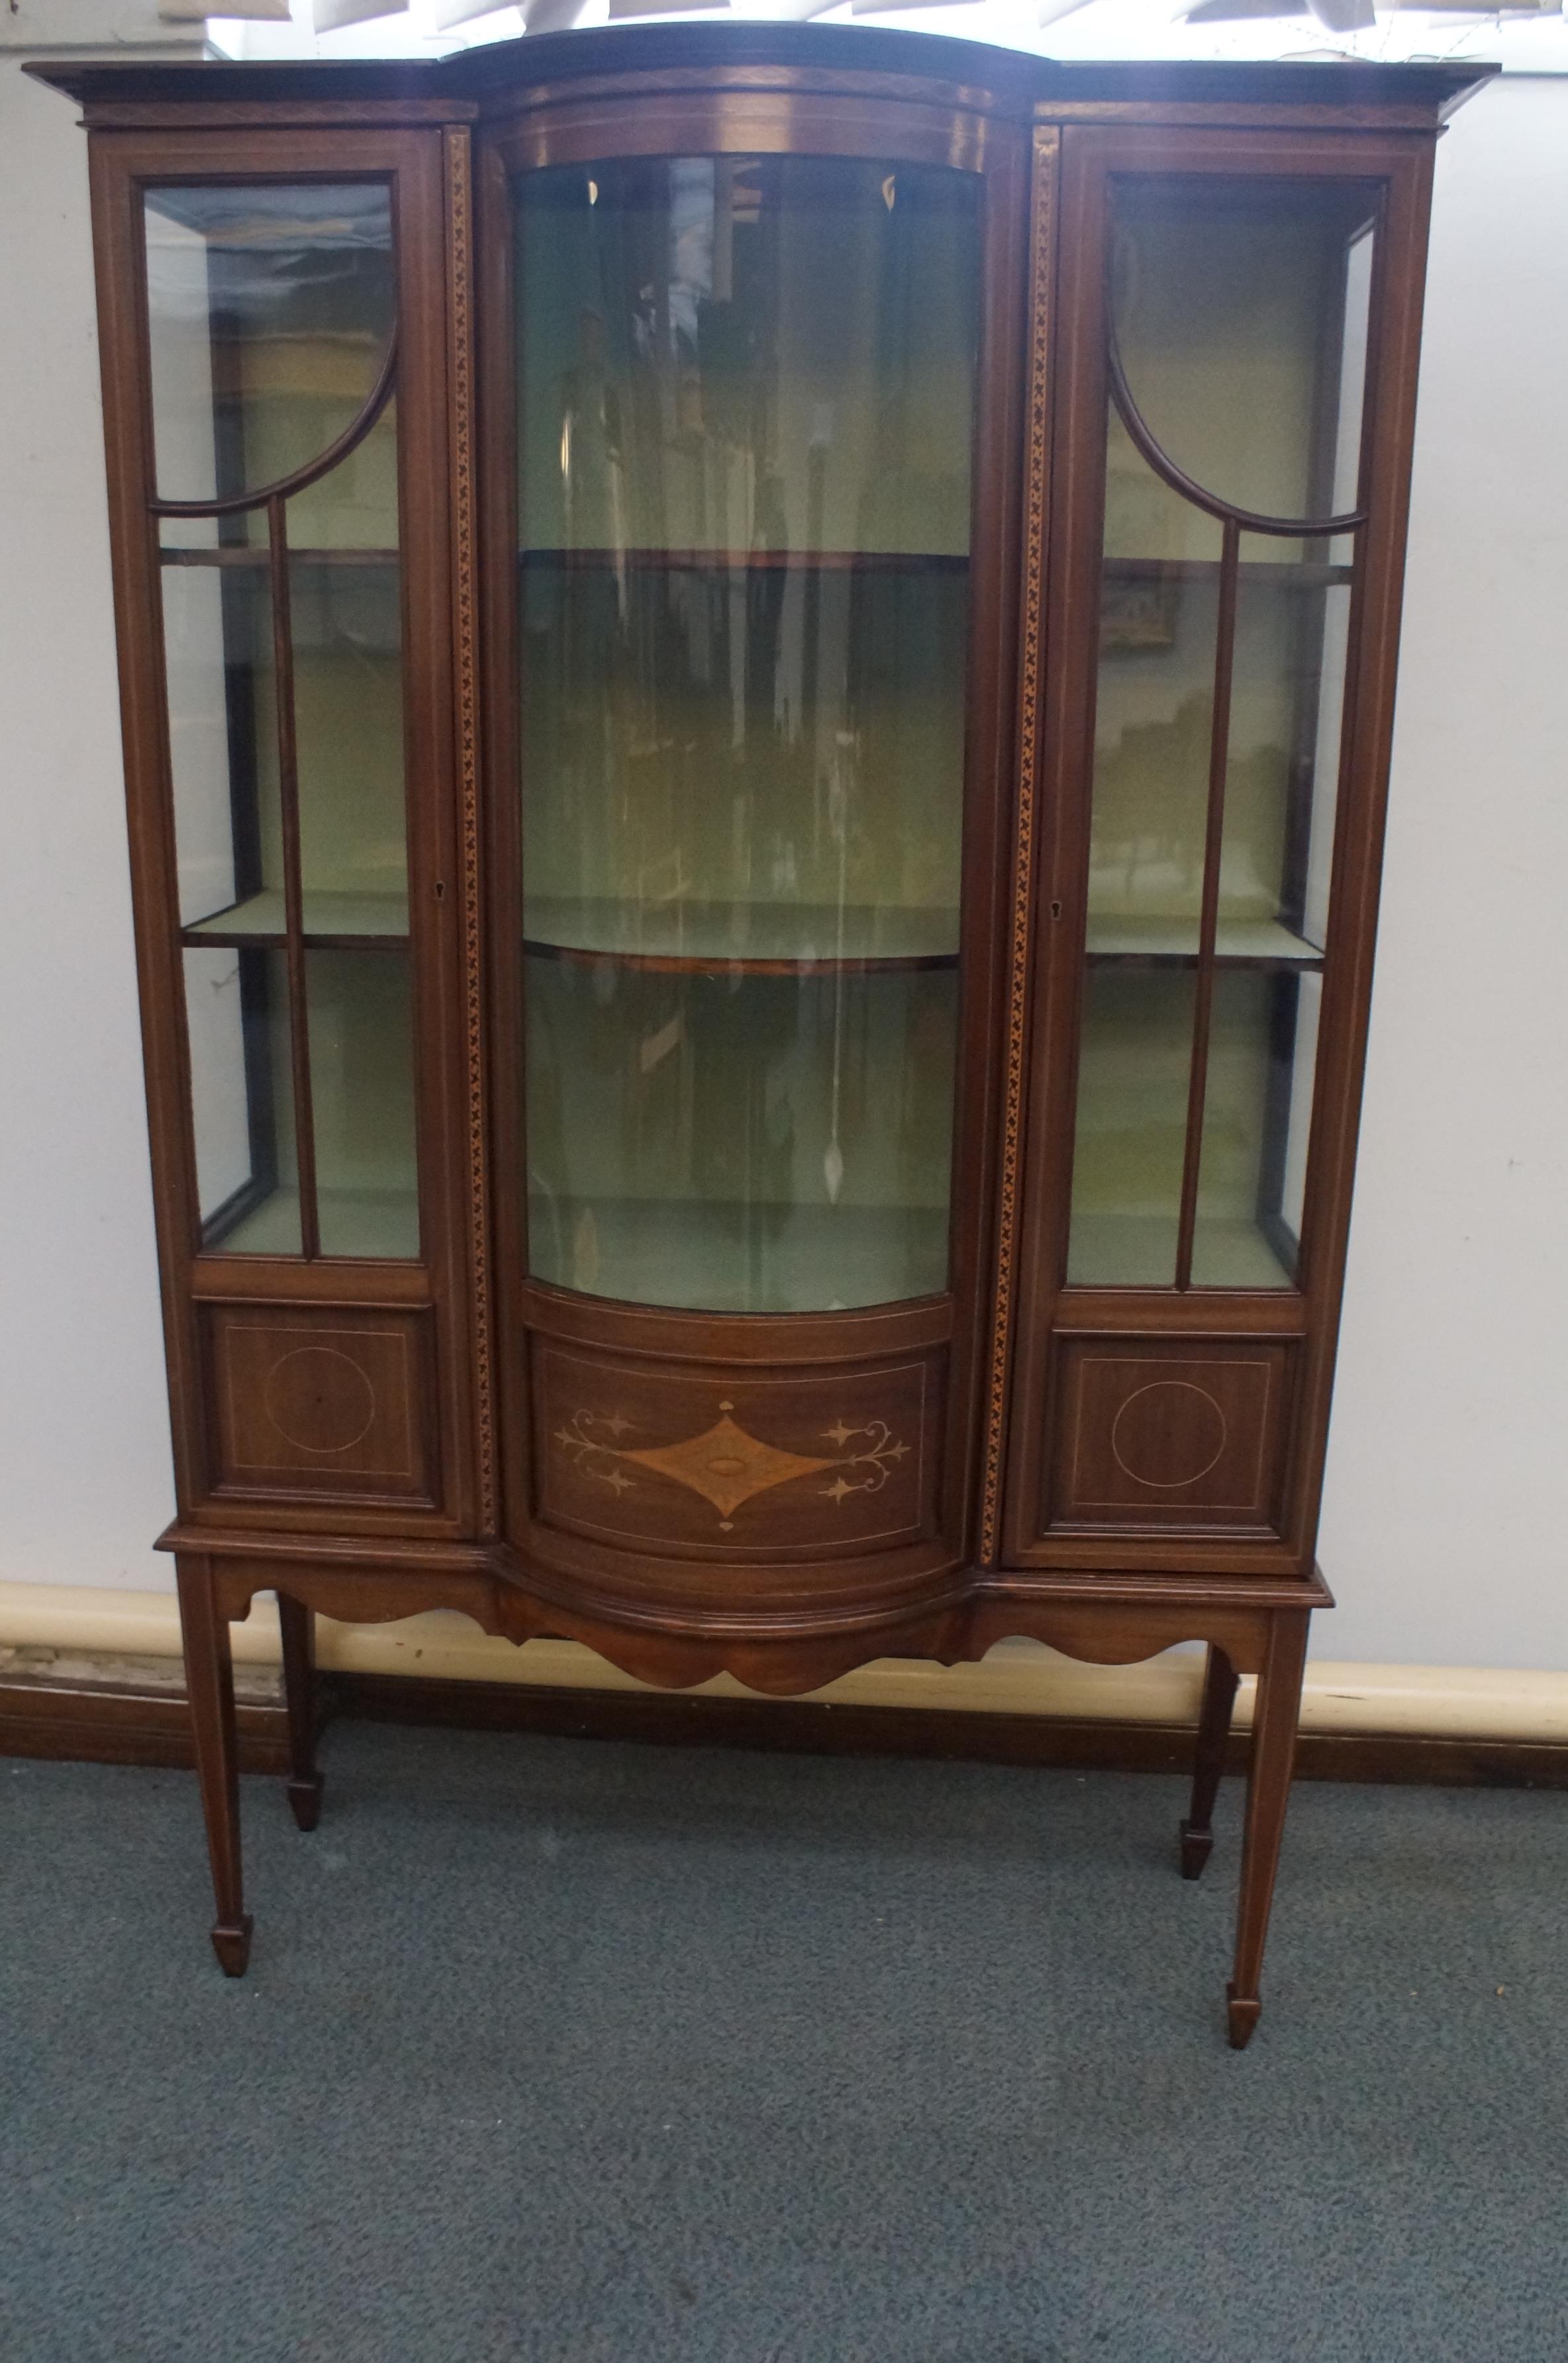 Early 20th century display cabinet with marquetry